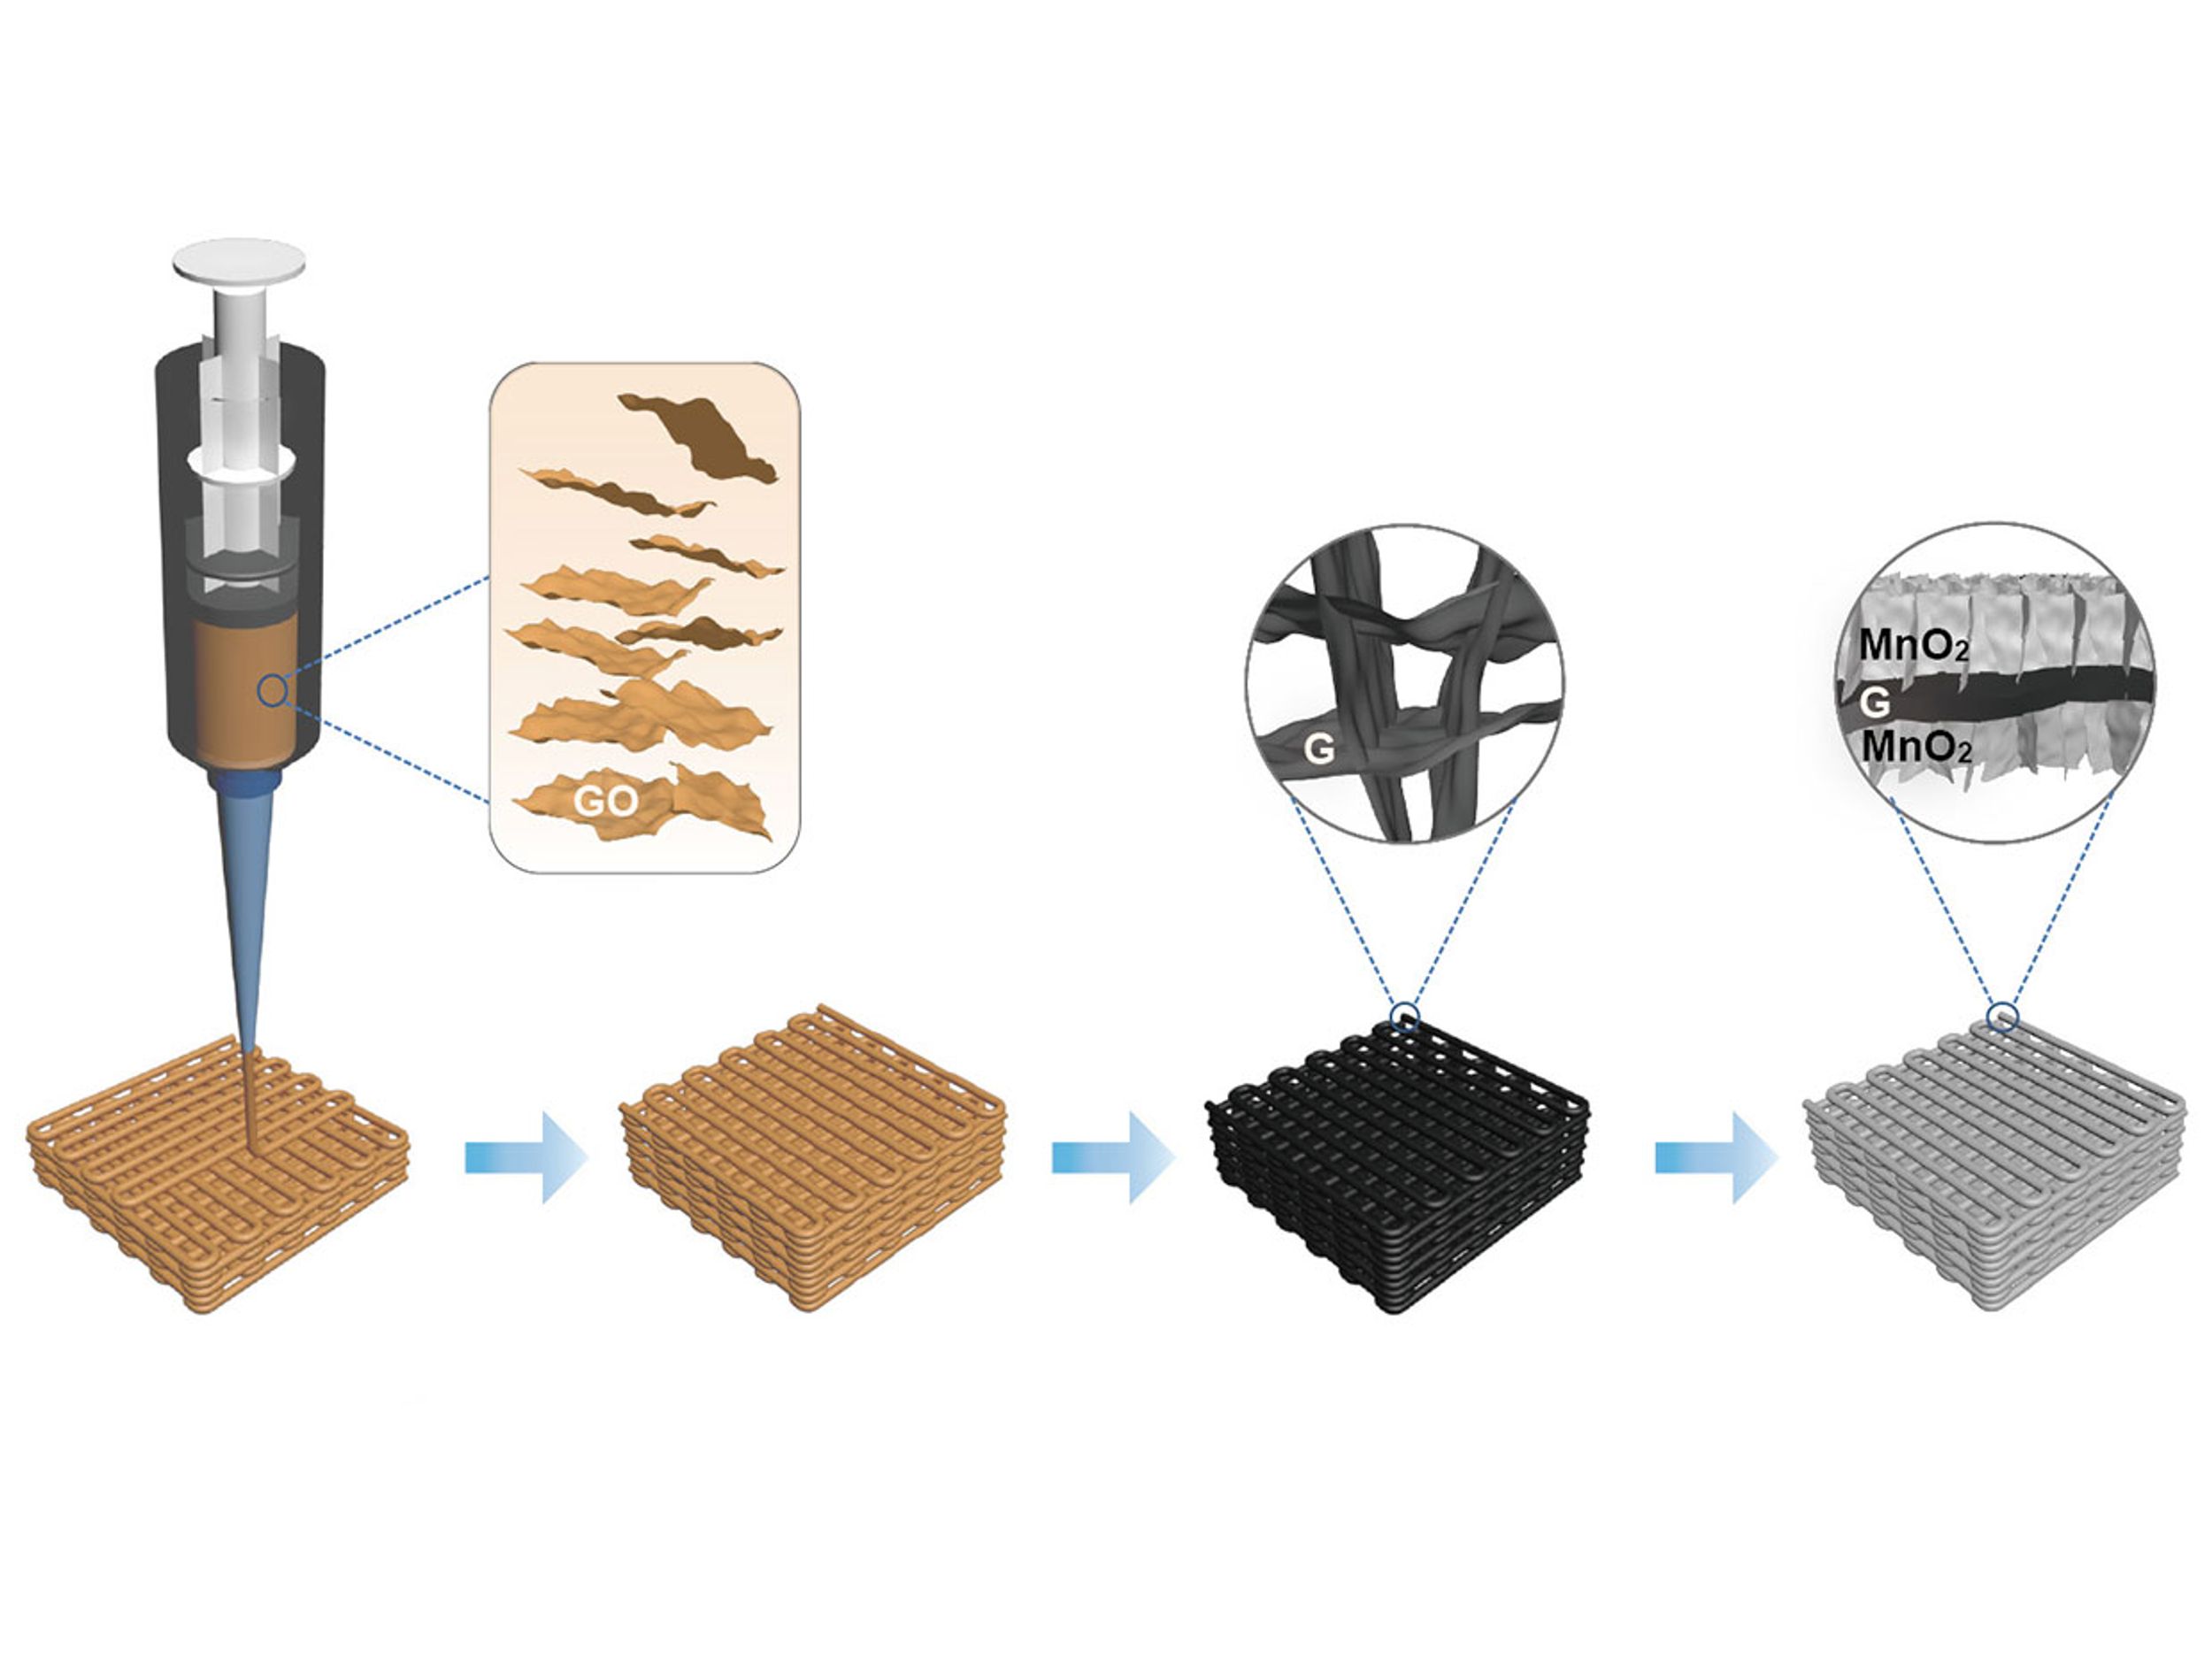 Process for 3D printing a supercapacitor electrode with graphene aerogel